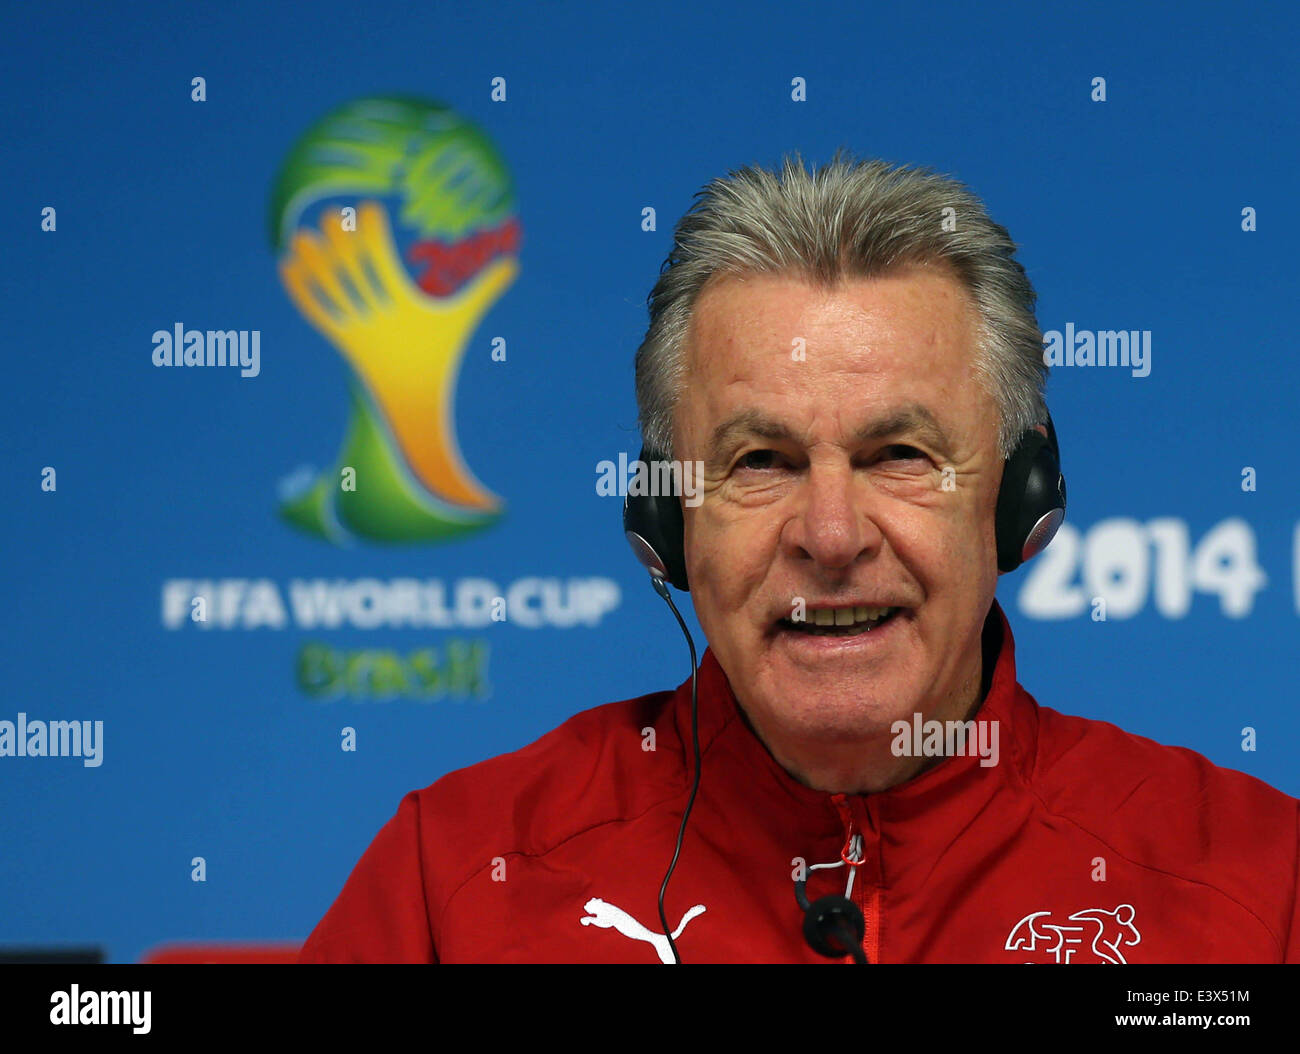 Sao Paulo, Brazil. 30th June, 2014. Switzerland's Ottmar Hitzfeld attends a press conference in Sao Paulo, Brazil, on June 30, 2014. Switzerland will face Argentina here in a Round of 16 match of 2014 FIFA World Cup on Tuesday. © TELAM/Xinhua/Alamy Live News Stock Photo